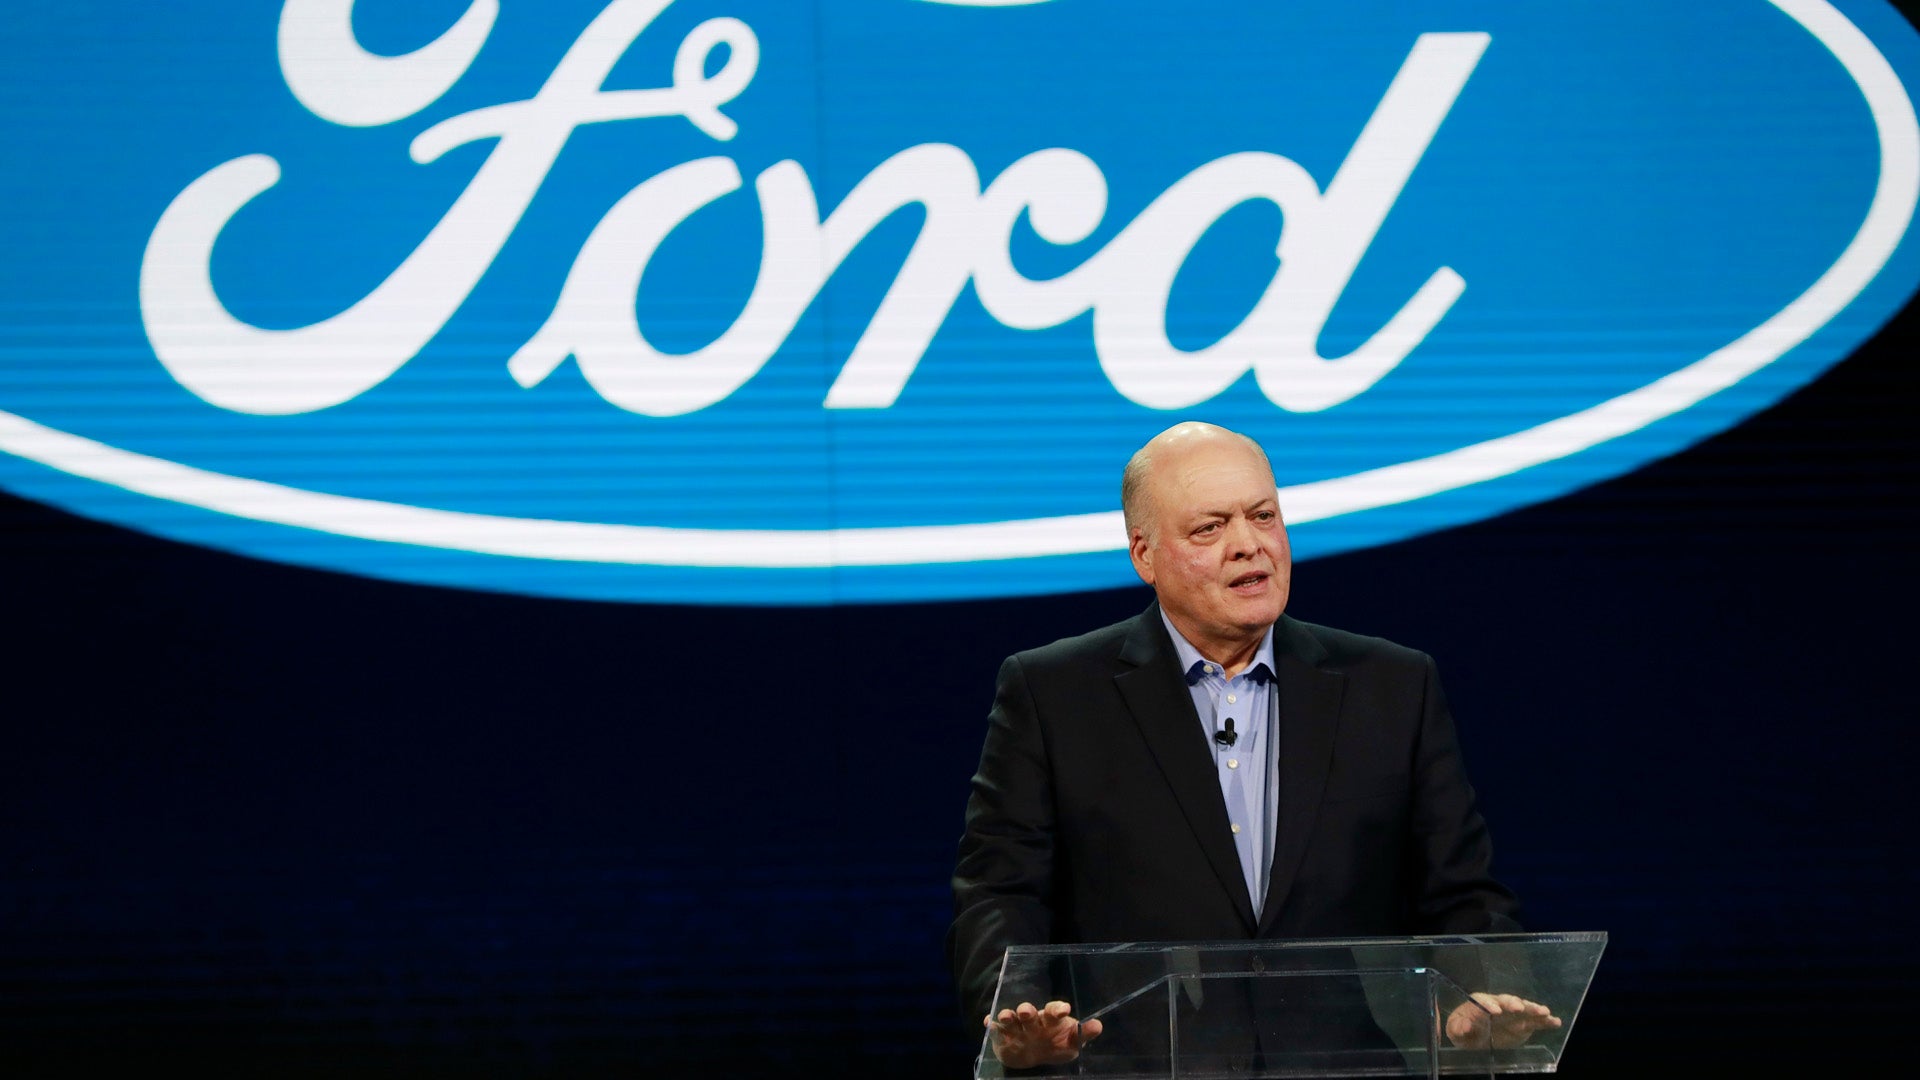 Jim Hackett Out as Ford CEO After Three Years